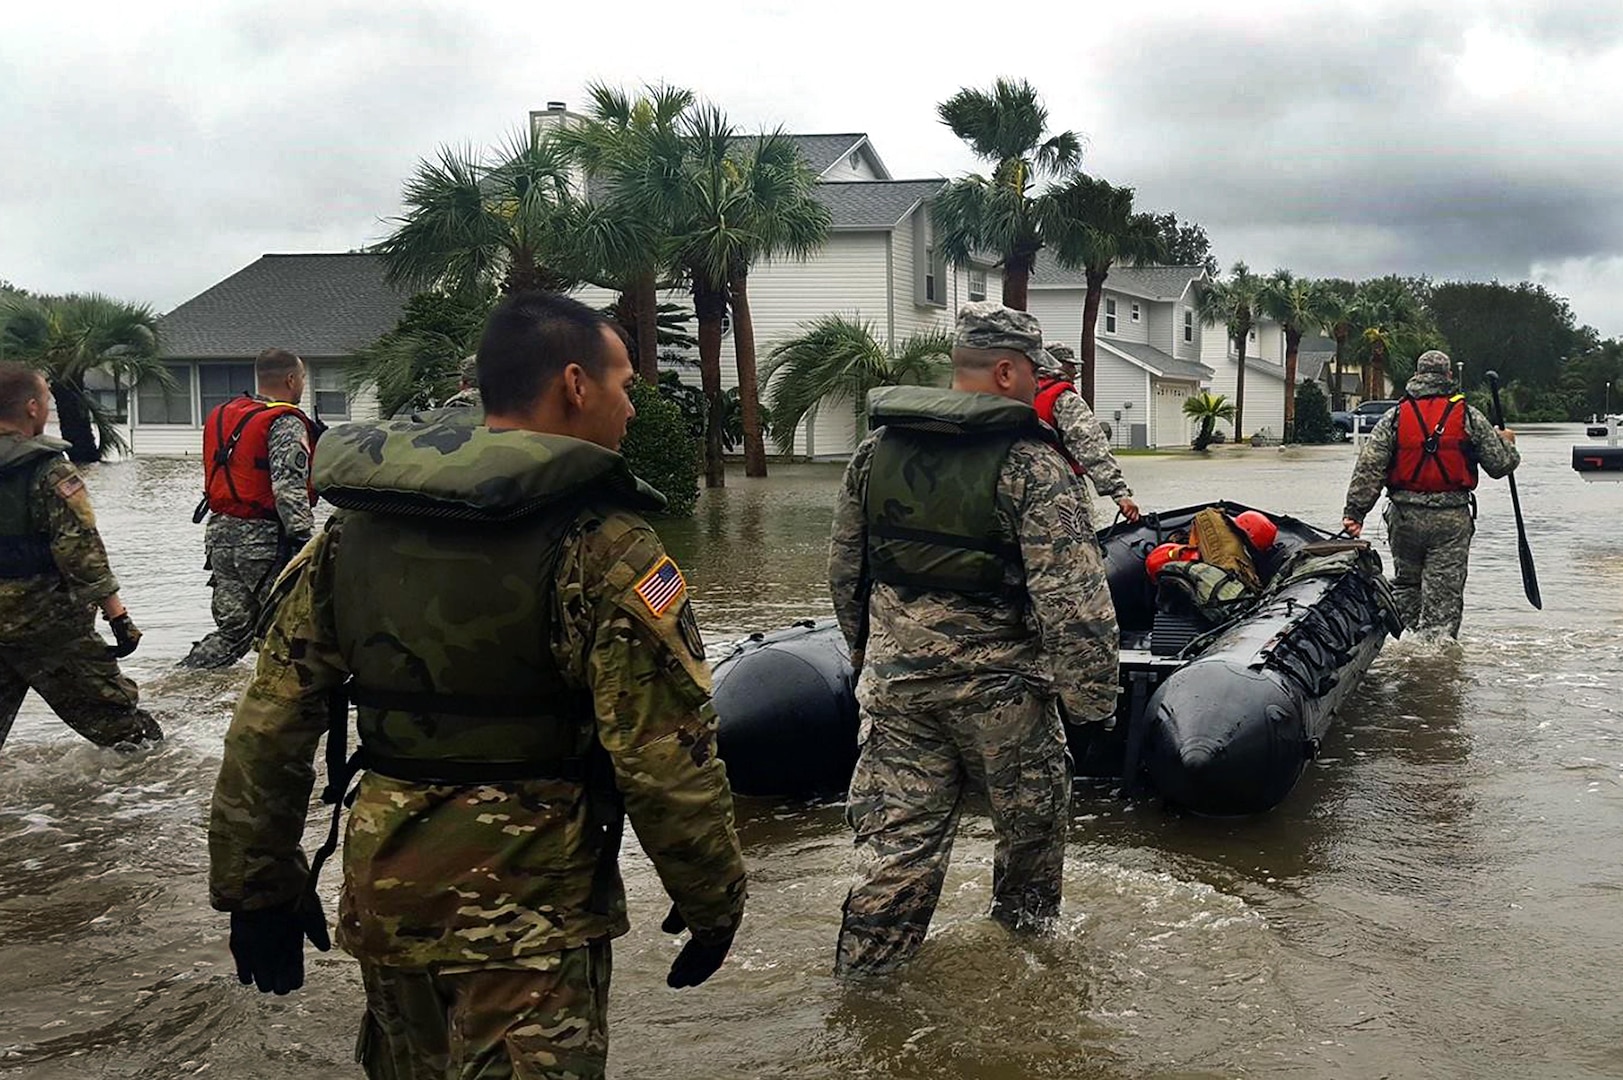 A search and rescue team with the Florida  National Guard wades into areas in St. Augustine, Florida, affected by Hurricane Matthew to assist with disaster relief efforts. More than 9000 Guard members are on duty throughout Florida, Georgia and the Carolinas assisting state and local authorities with search and rescue and relief operations. 